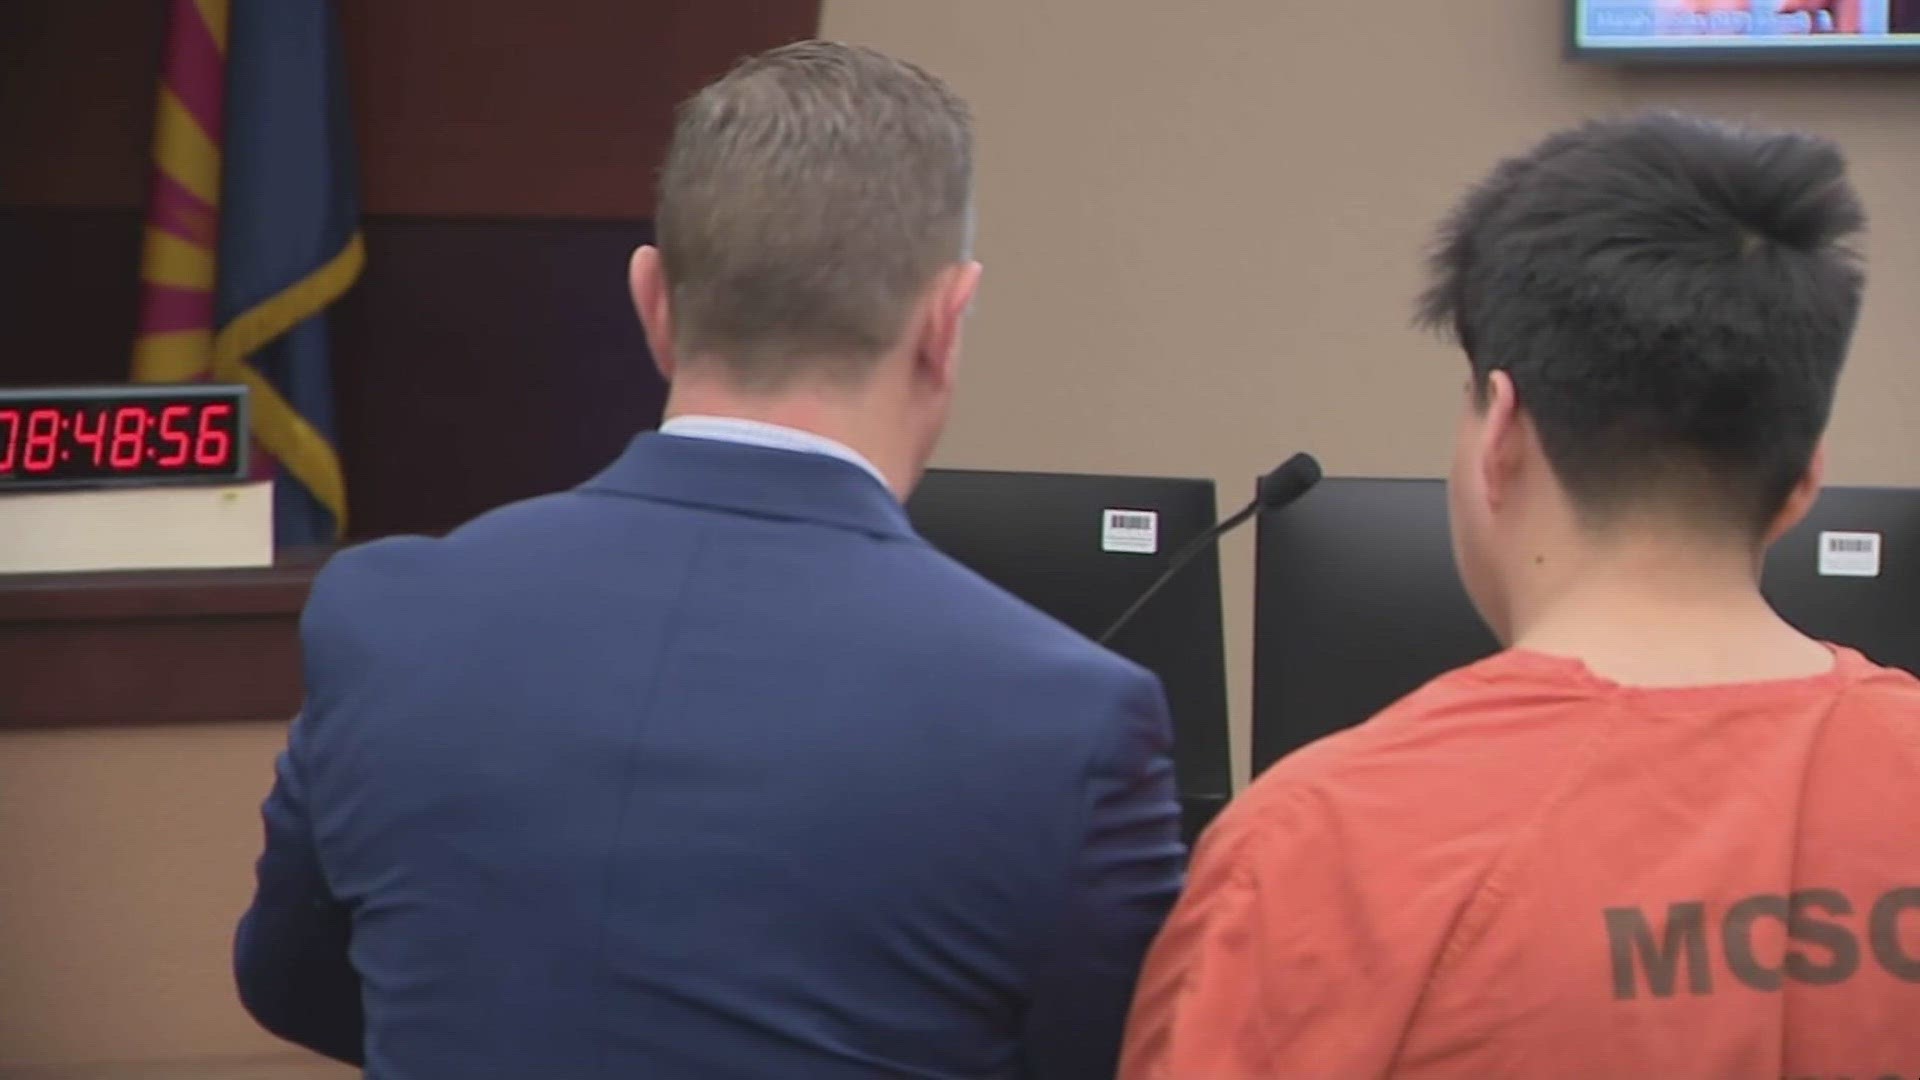 Billy appeared before a judge to plead not guilty on Thursday morning.